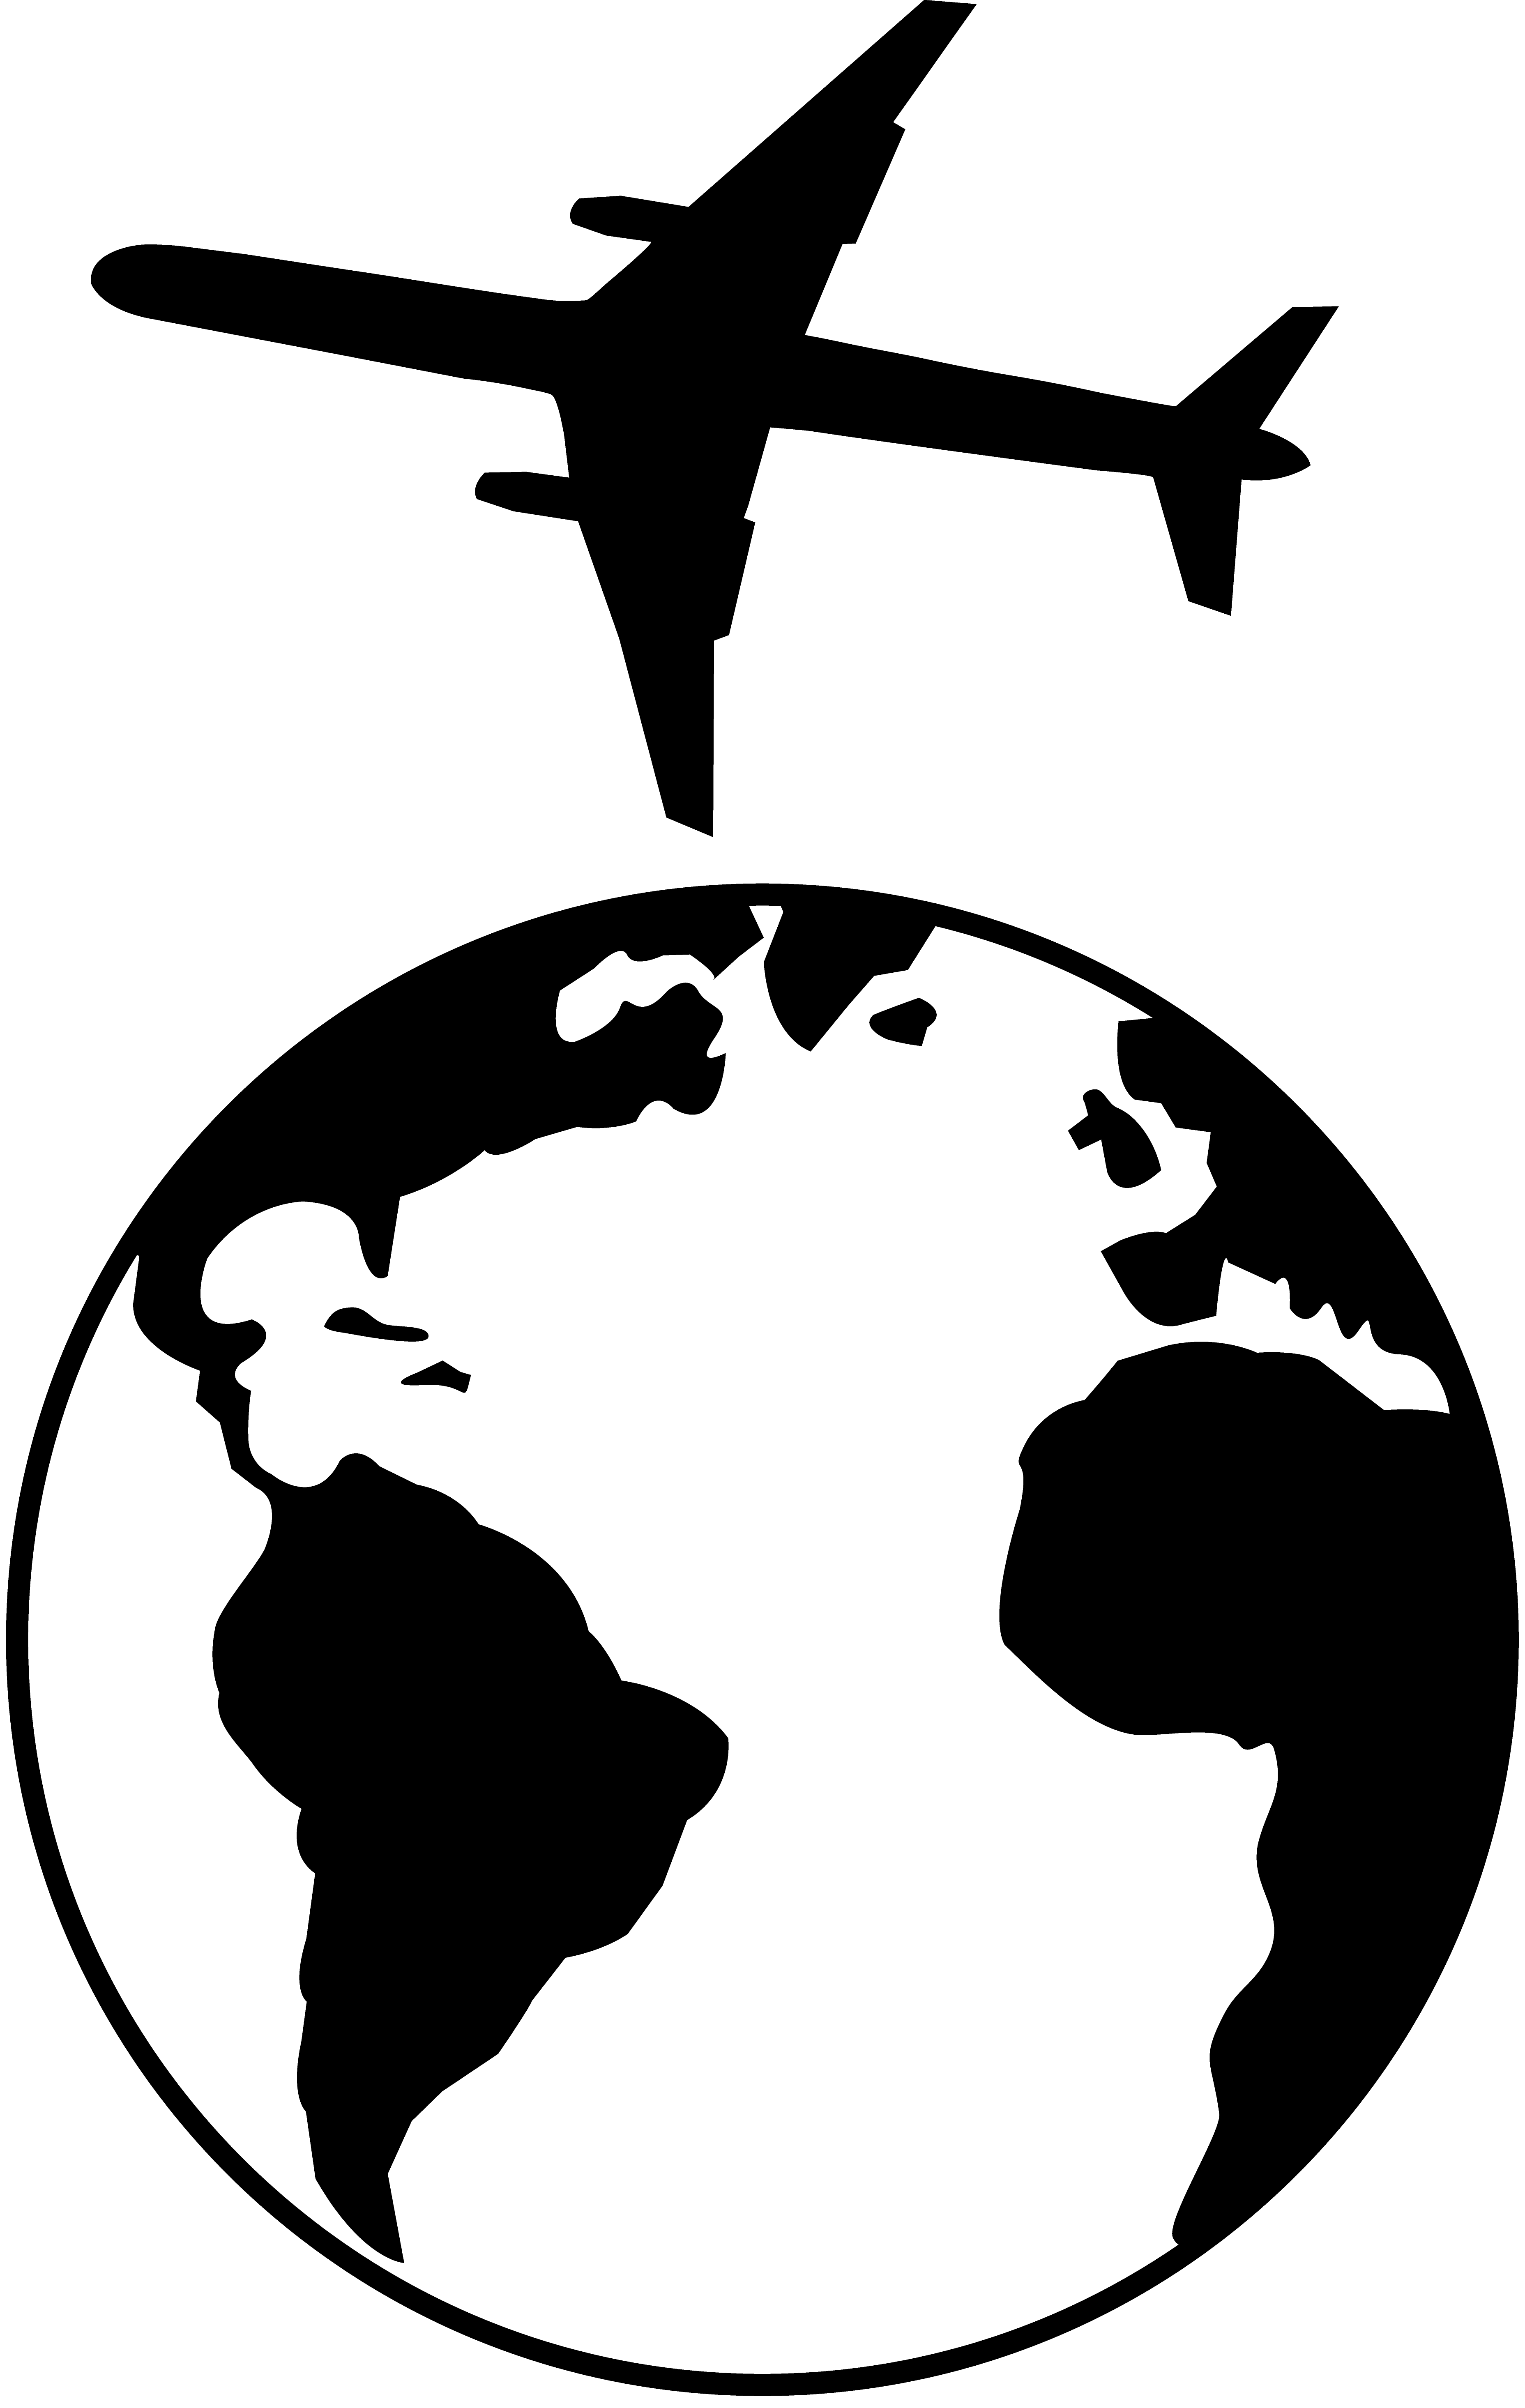 Environment clipart black and white. Airplane flying over earth